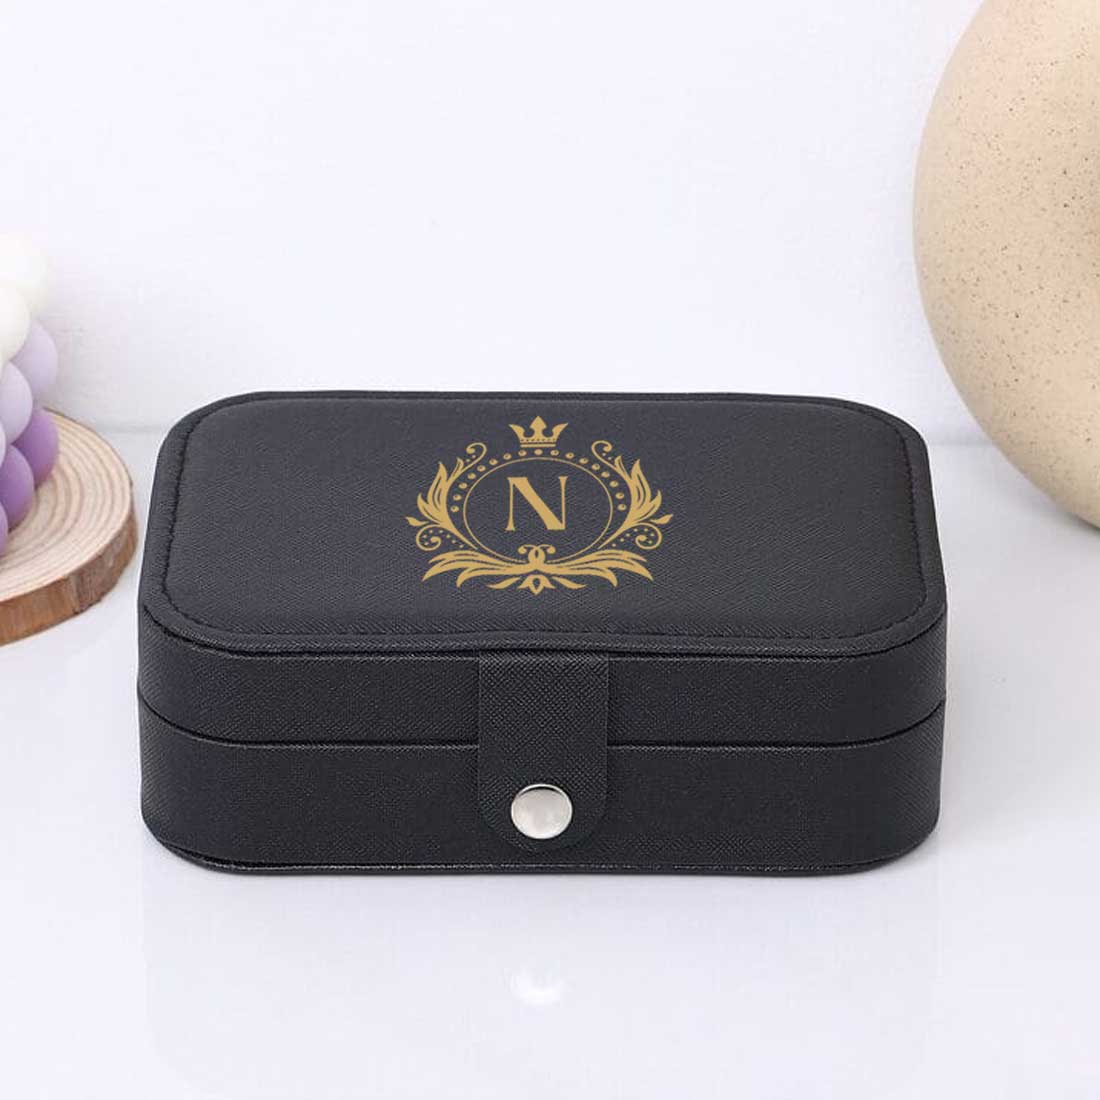 Customized Jewelry Box Organizer for Travel Storage Case for Rings Earrings and Pendants- Golden Monogram